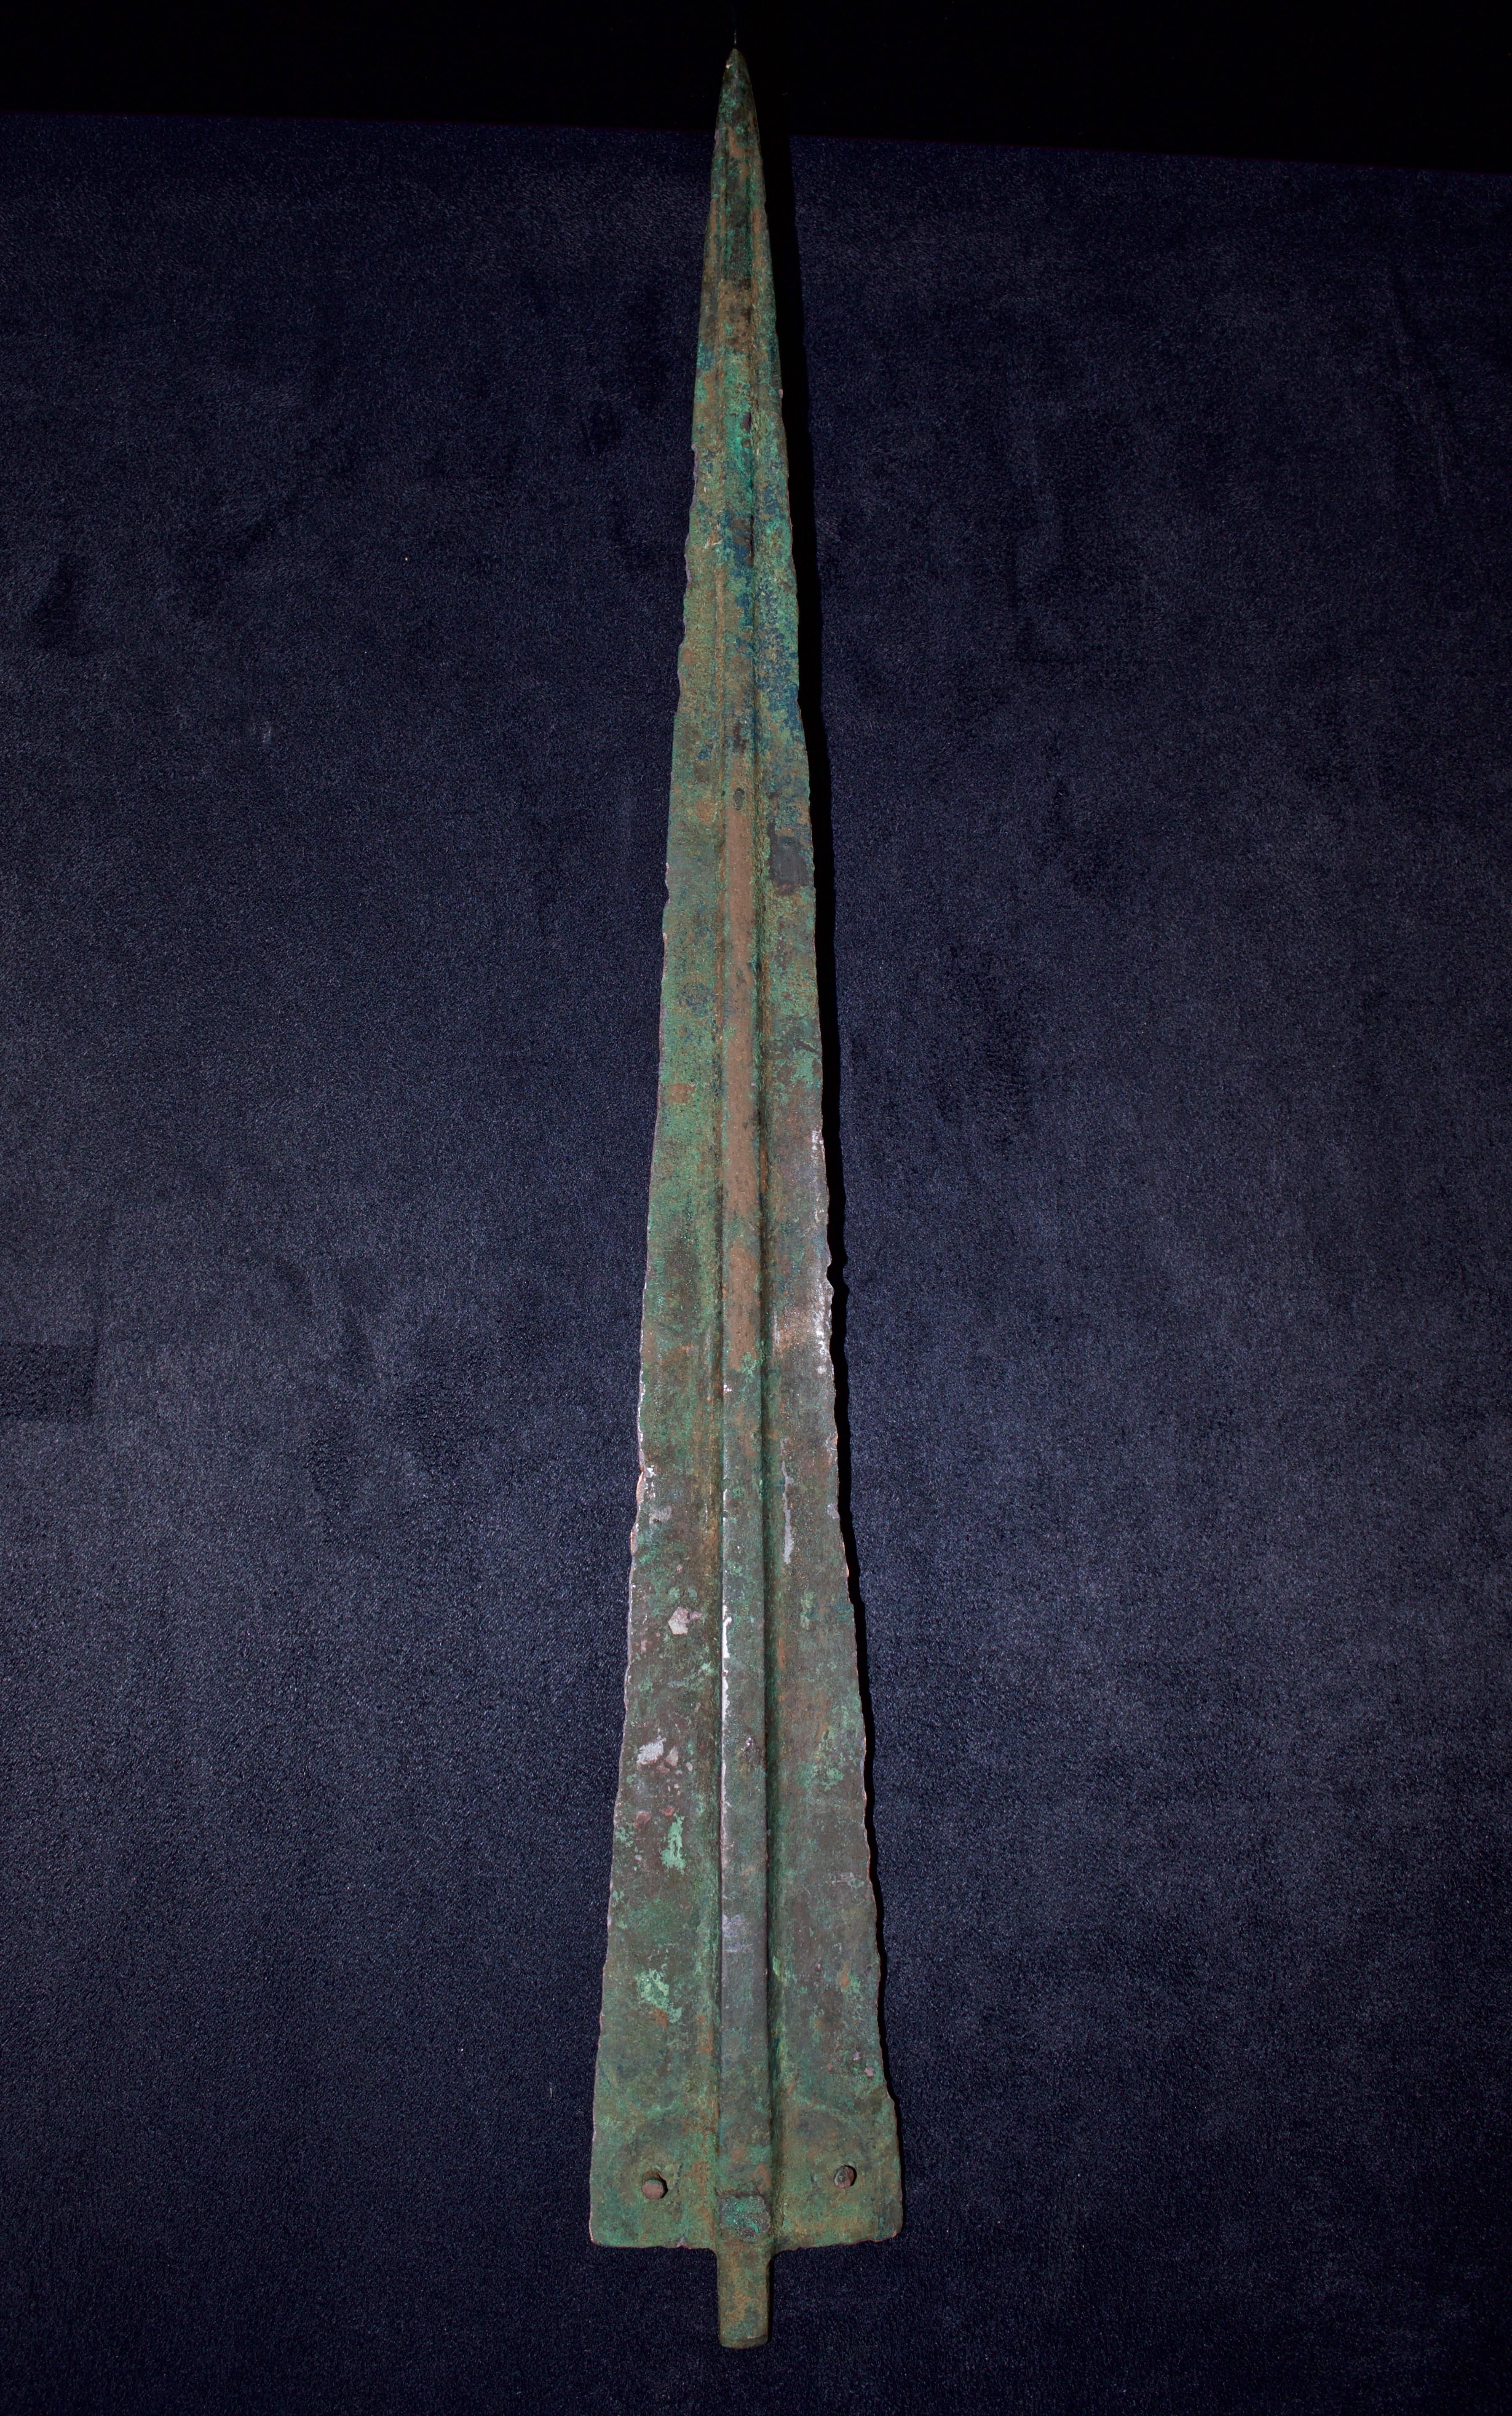 A long tapered insertion tang. It features blue-green and russet surface patinas, minor edge roughness, otherwise intact. This piece comes with a custom stand and Certificate of Authenticity included.

Luristan (or Lorestan) is a province of western